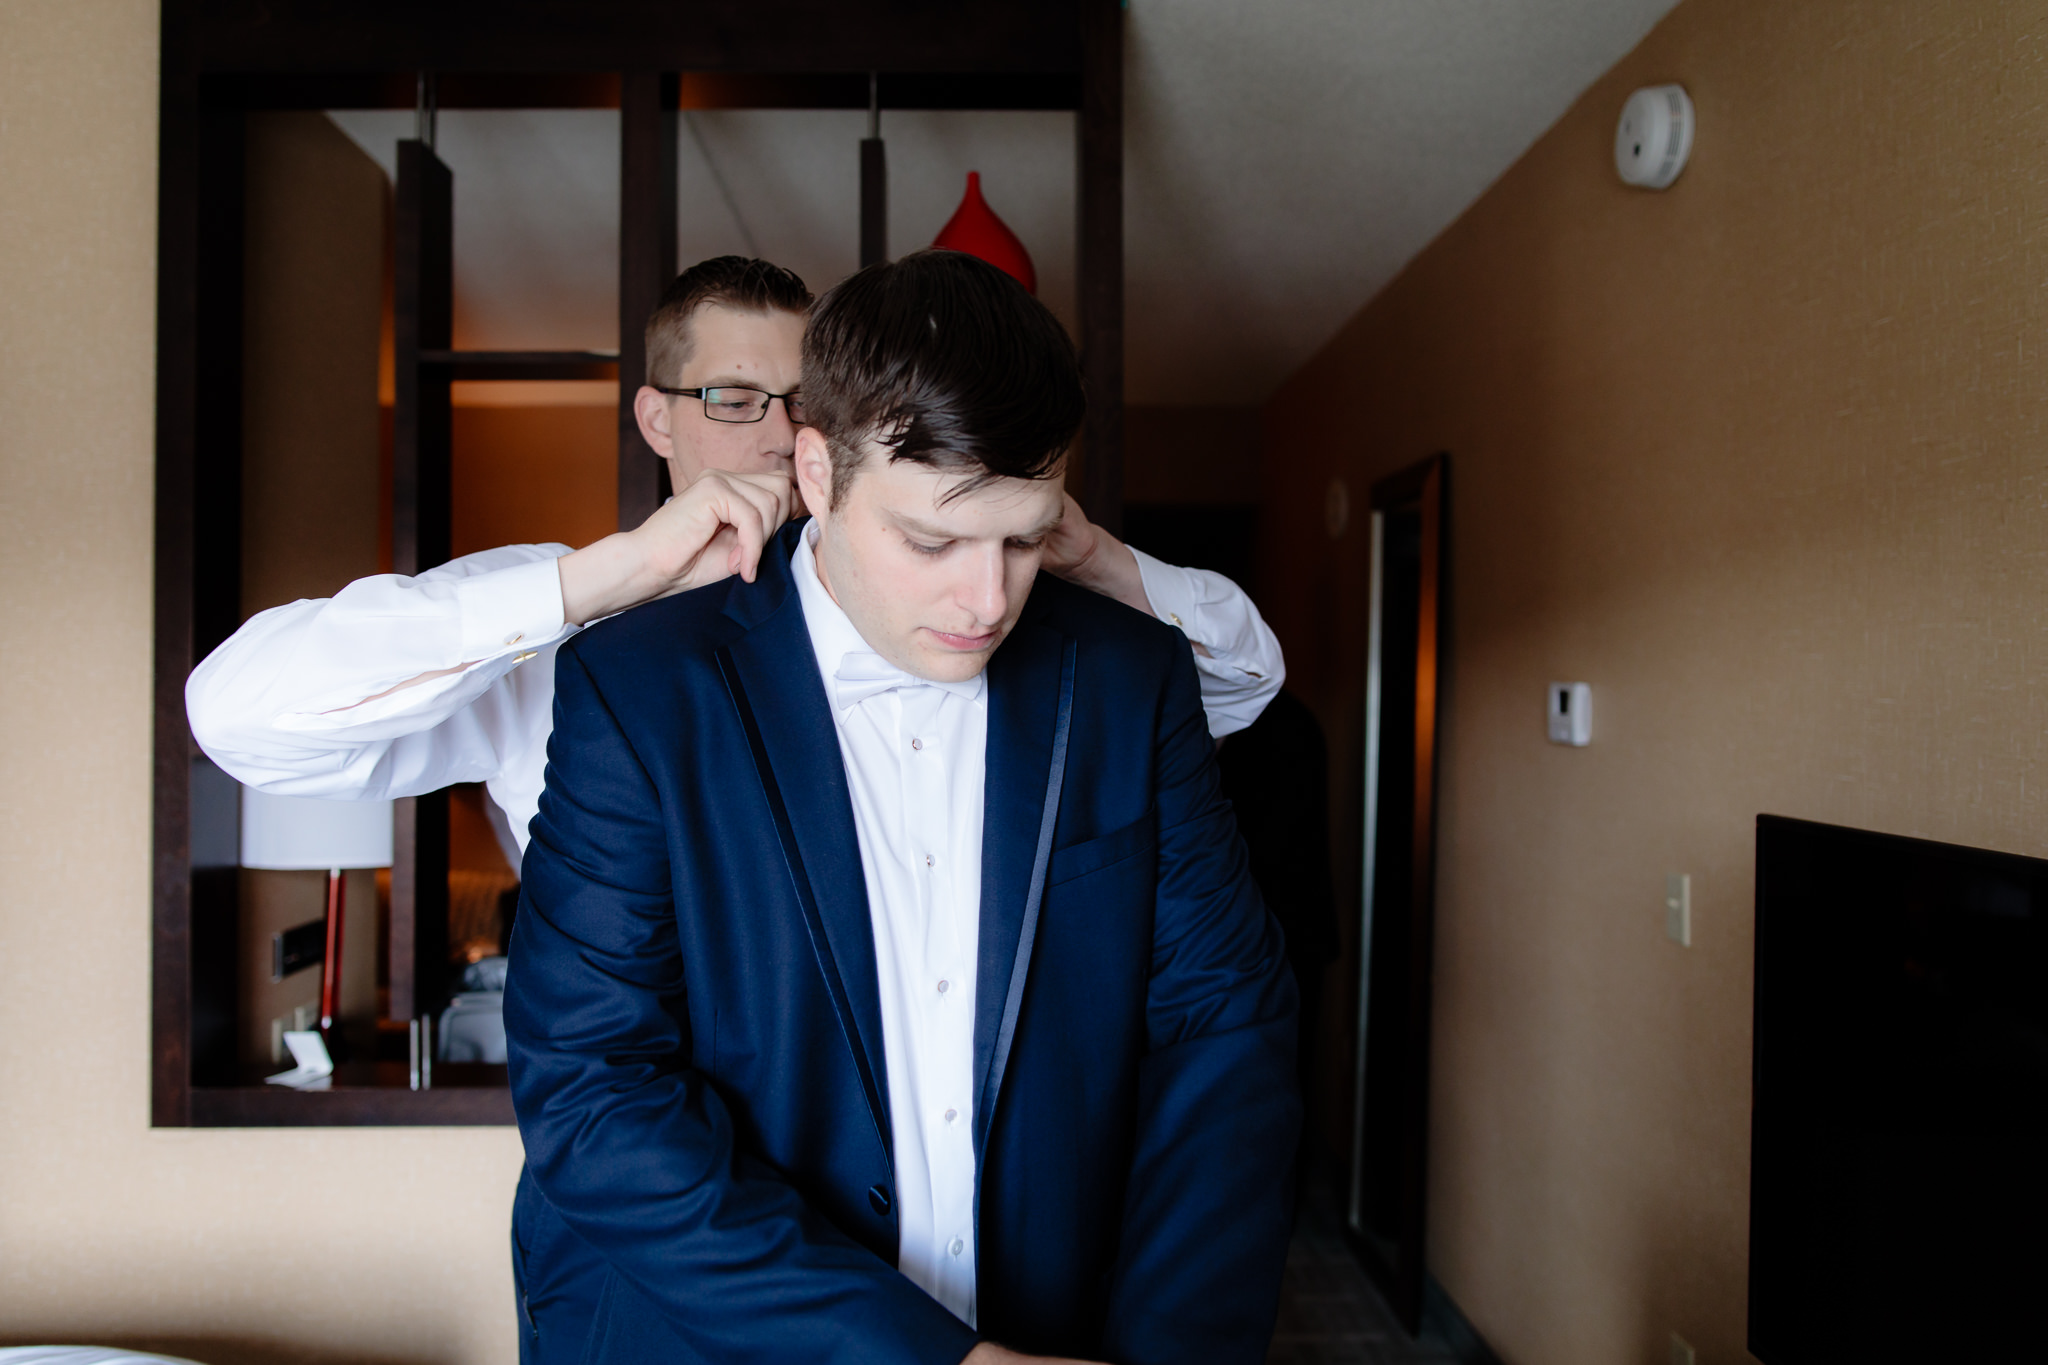 Groom's brother adjusts his collar before his wedding at Duquesne University